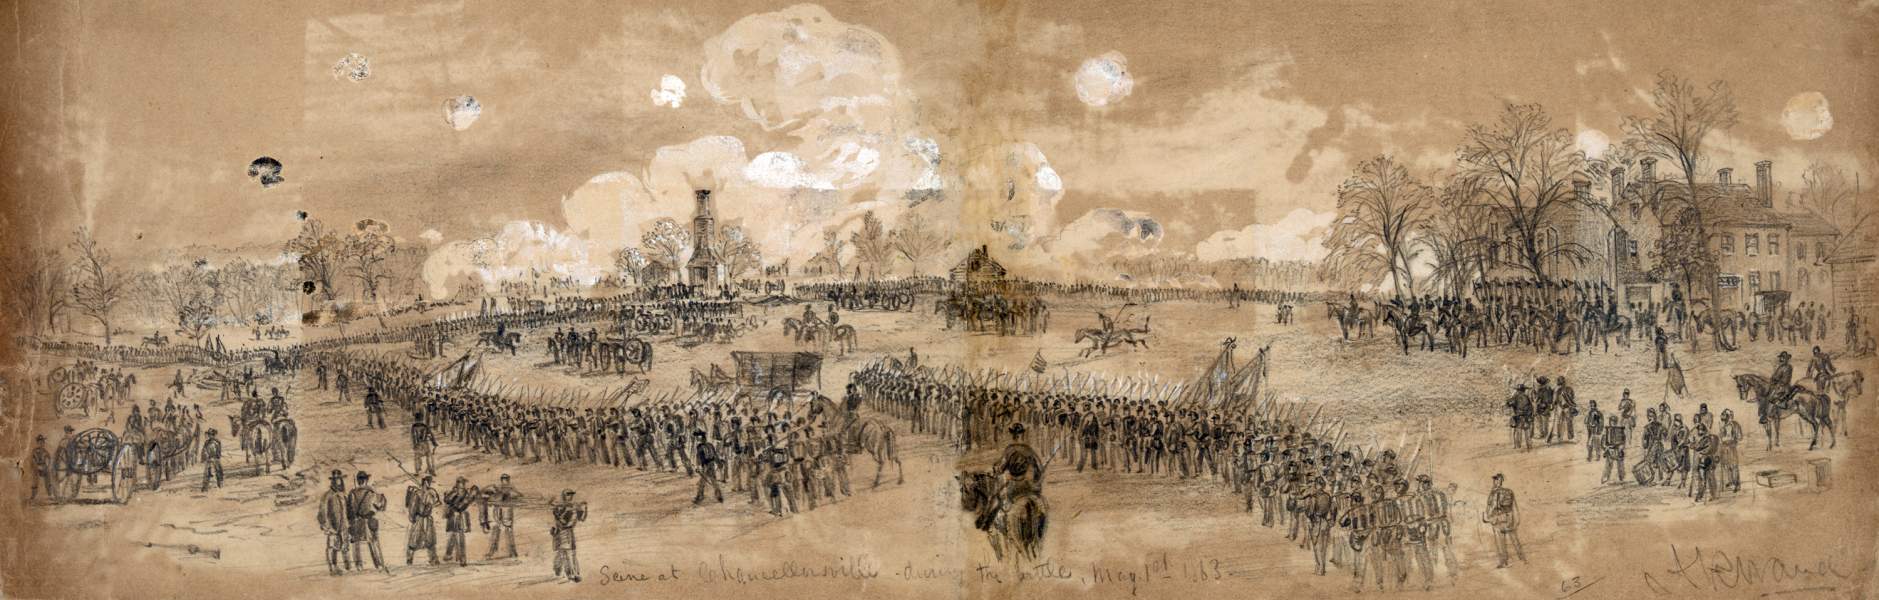 "Chancellorsville During the Battle," May 1, 1863, artist's impression, zoomable image